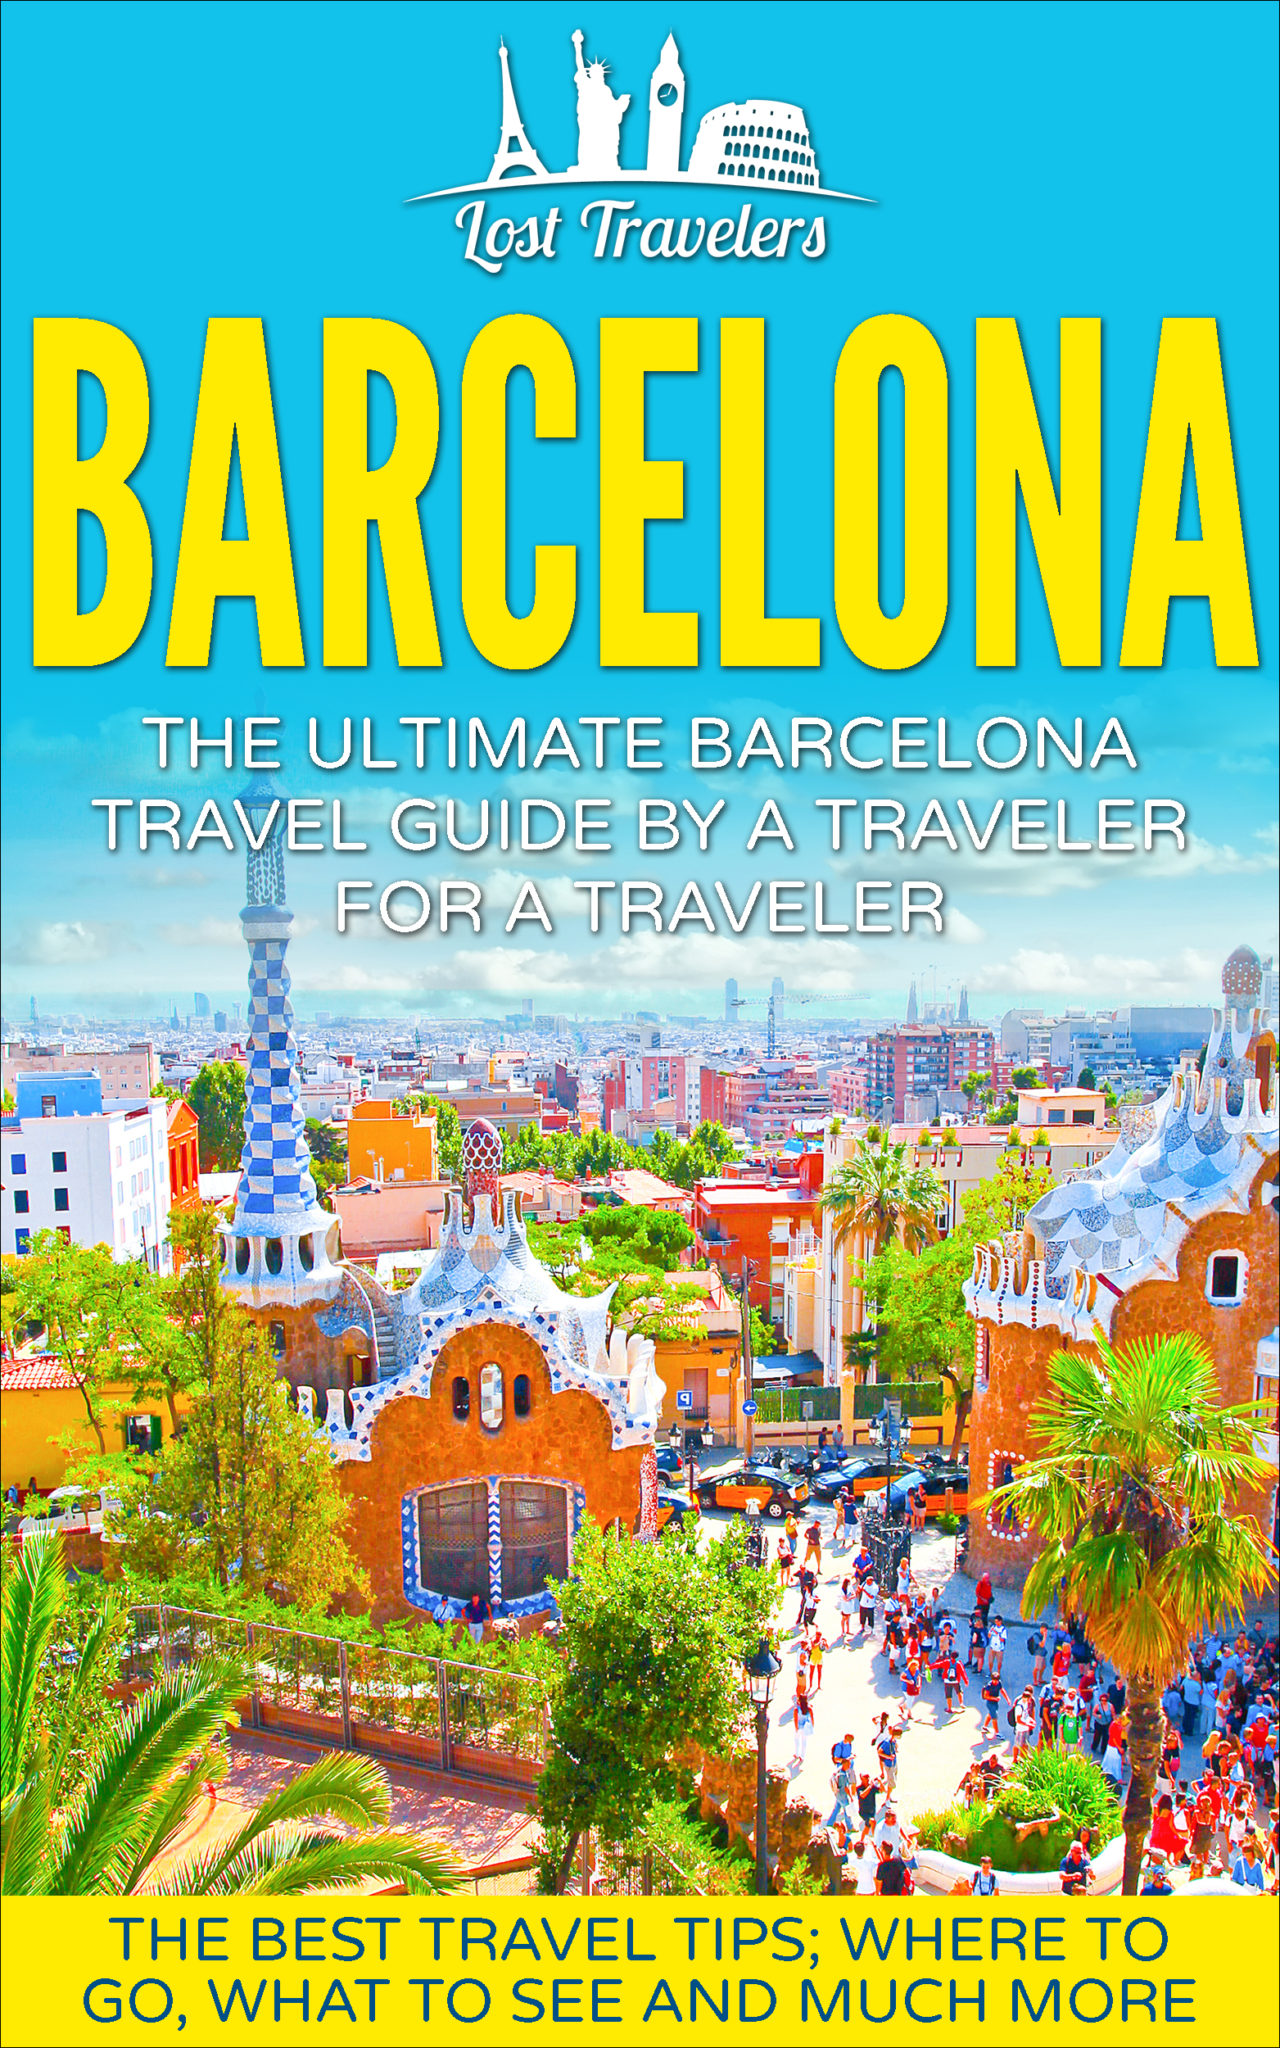 FREE: Barcelona: The Ultimate Barcelona Travel Guide By A Traveler For A Traveler by Lost Travelers by Lost Travelers